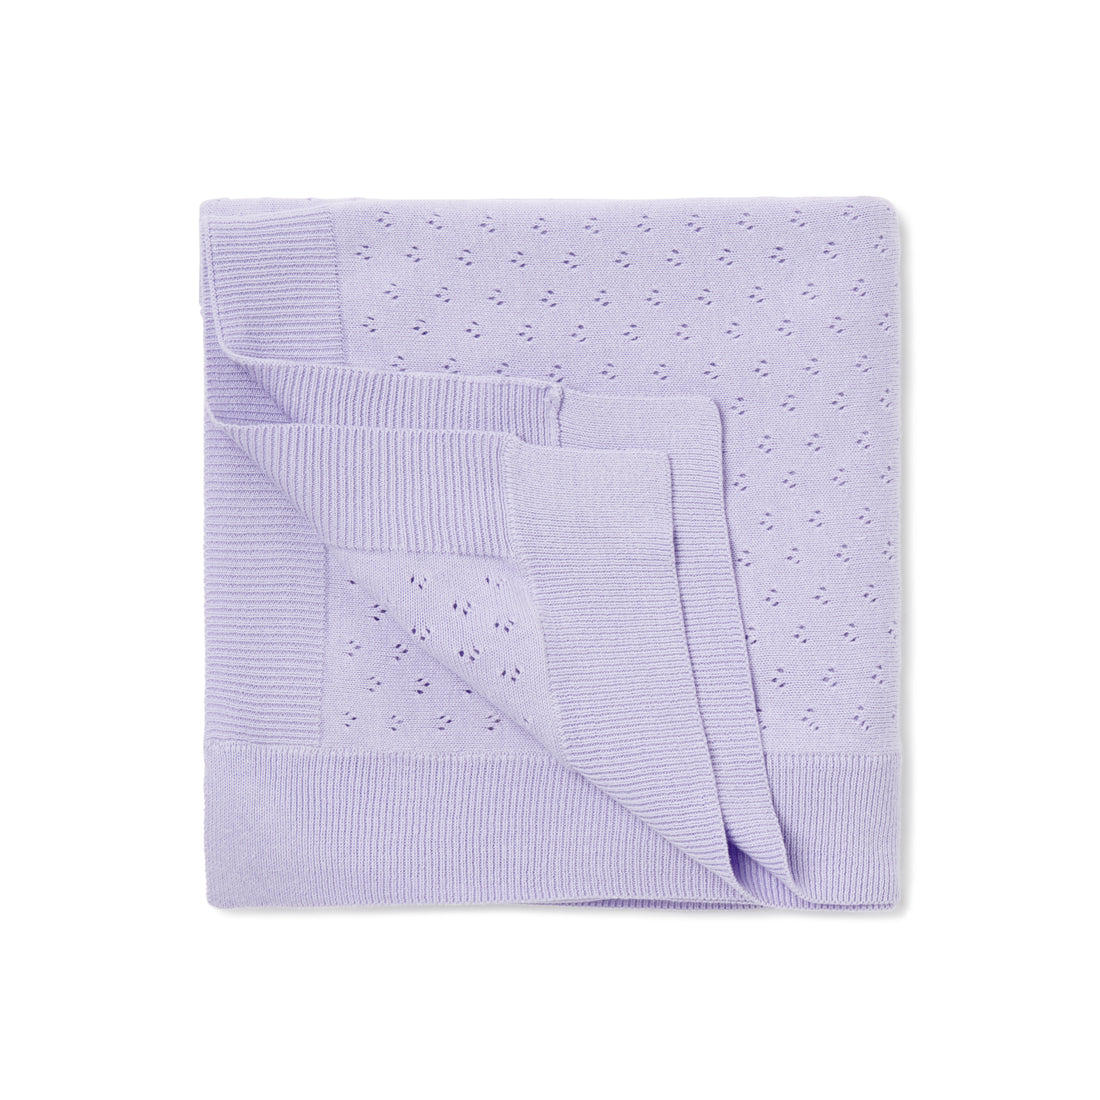 Baby Girl Pointelle Knitted Lavender Ruffle Knit Blanket Wrap